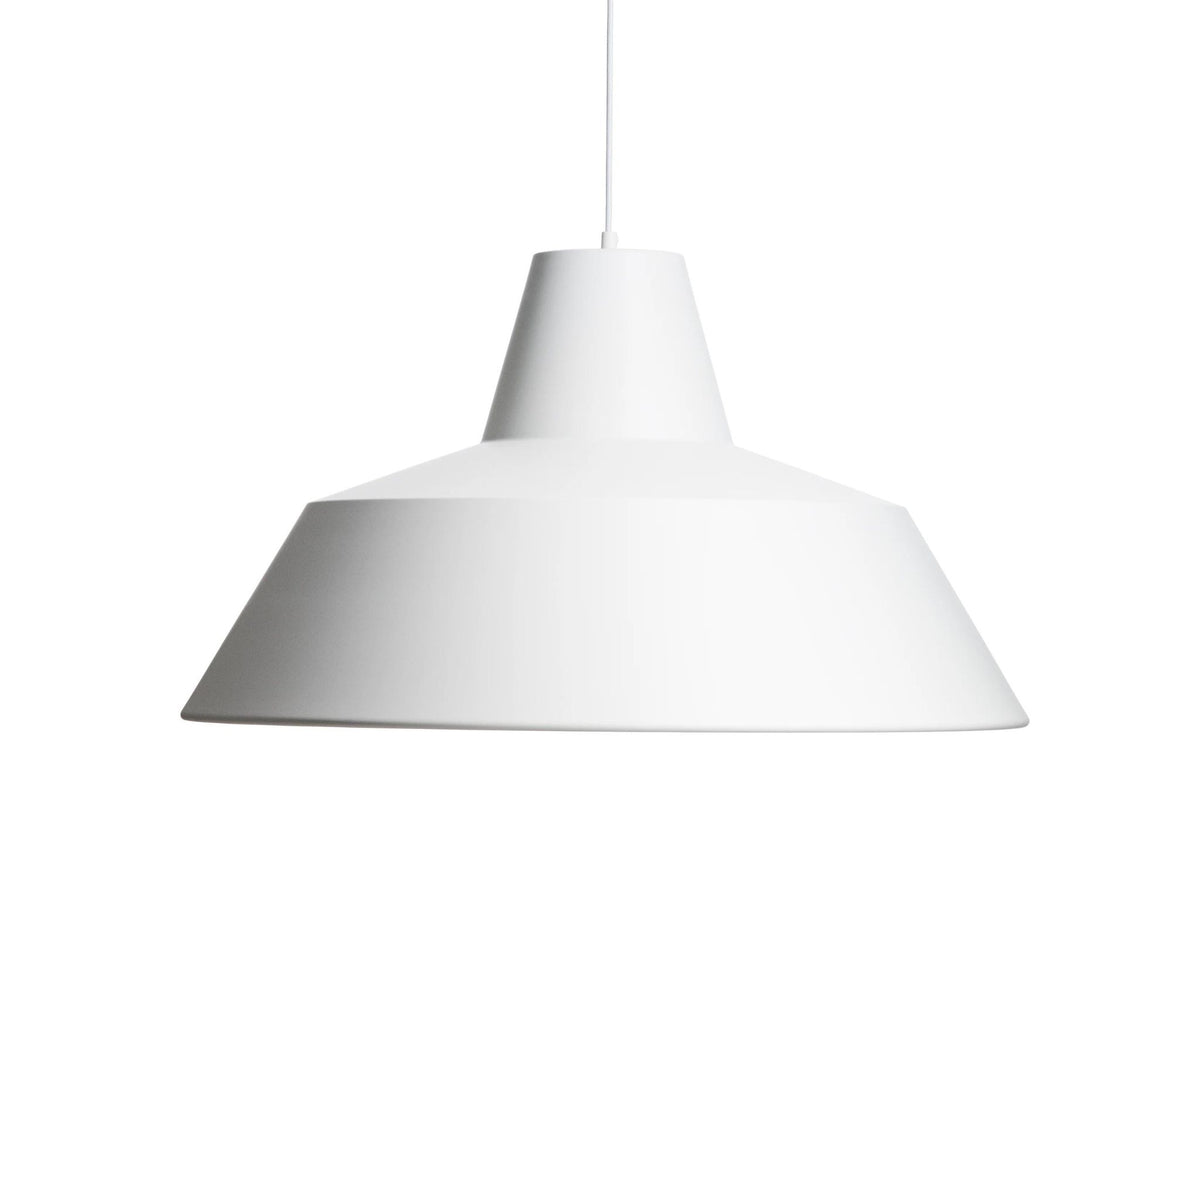 Made by Hand Workshop W5 Pendant in Matte White by A Wedel Madsen